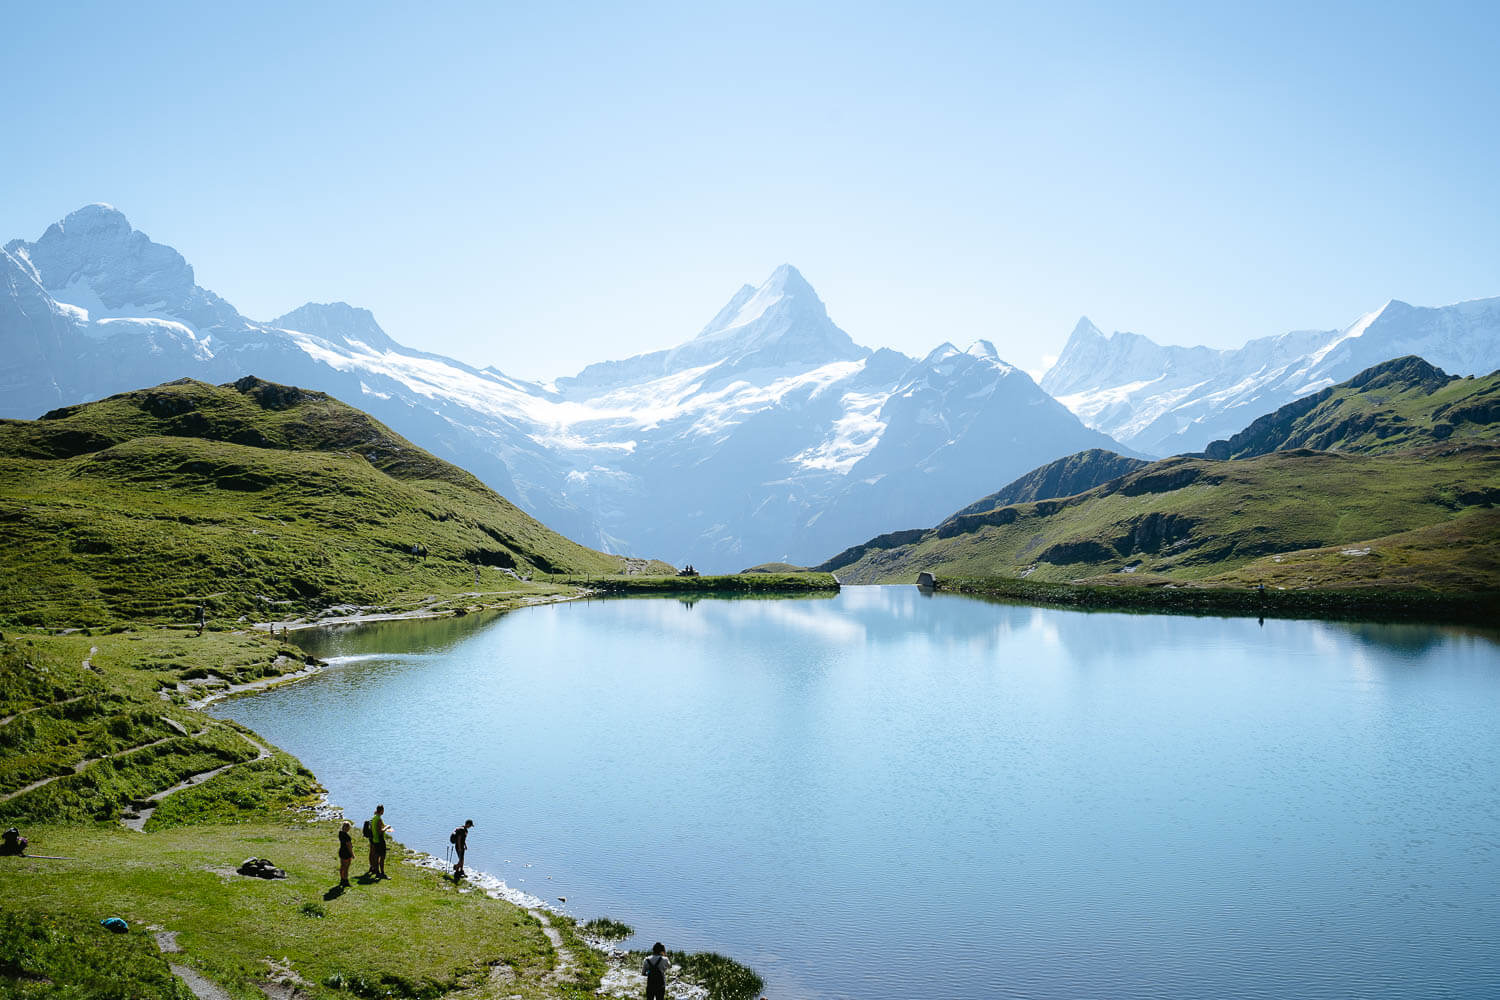 The Bachalpsee lake and Schreckhorn